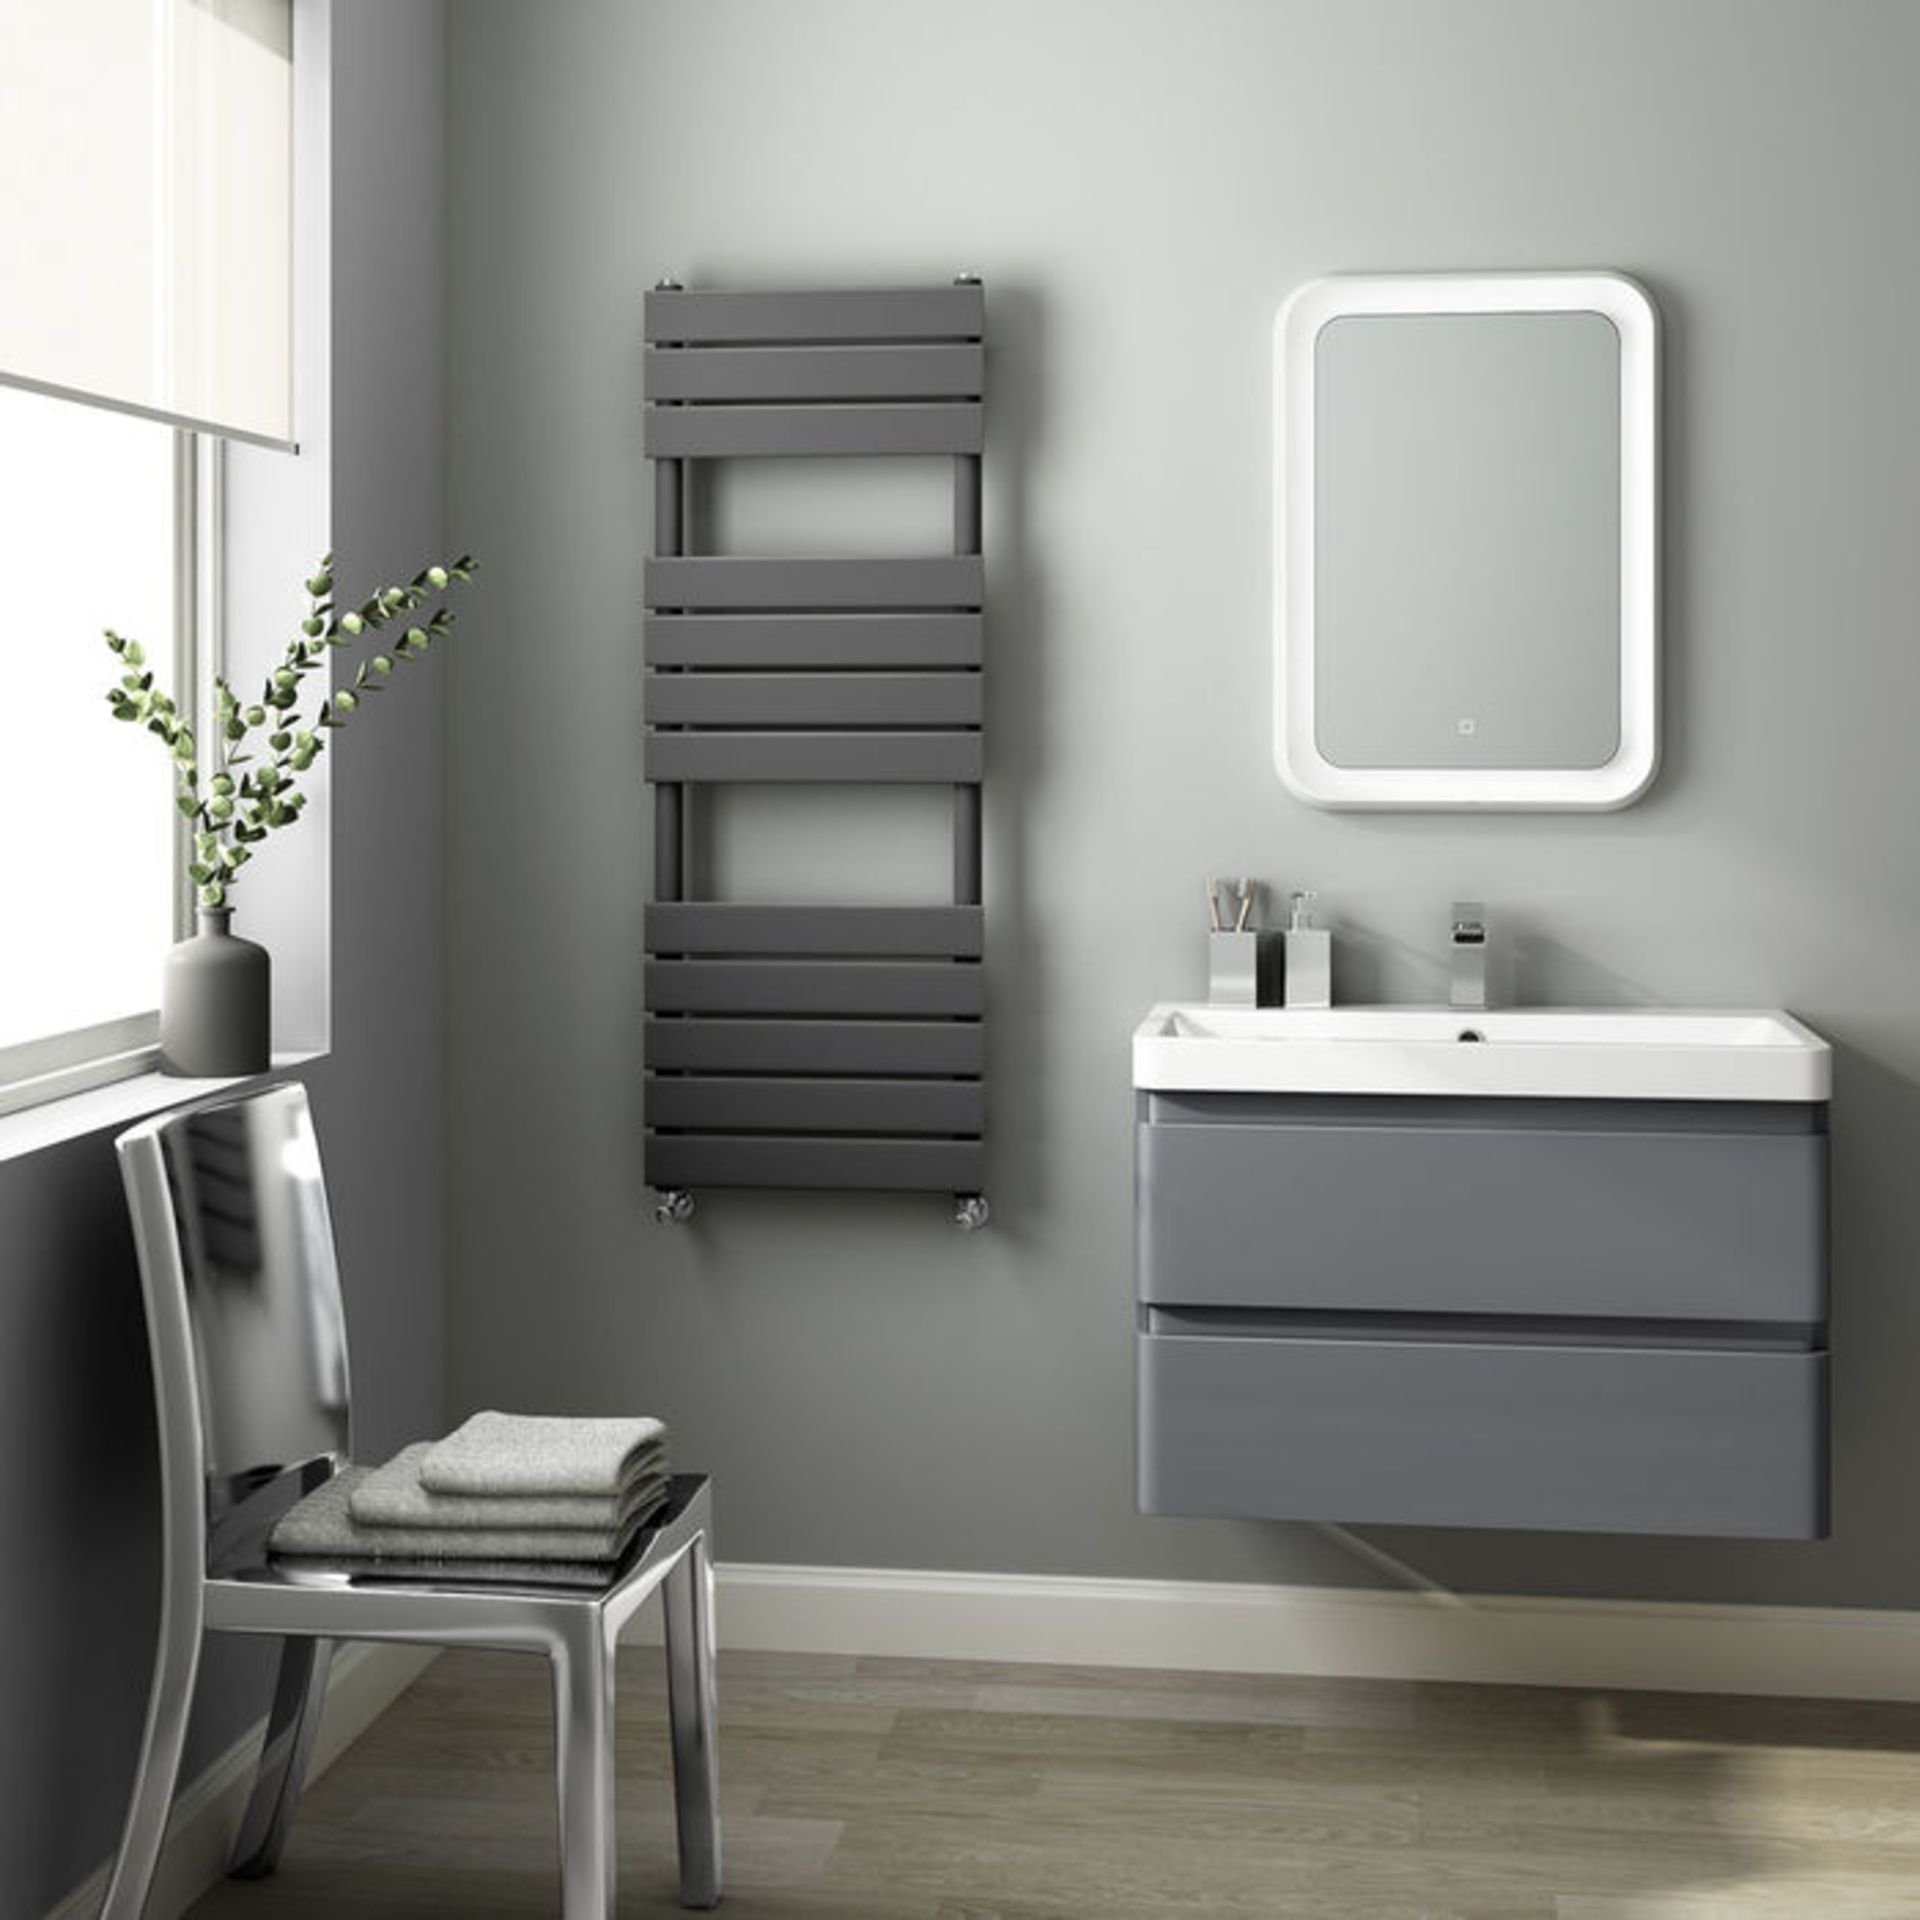 (H47) 1200x450mm Anthracite Flat Panel Ladder Towel Radiator RRP £349.99 Made with low carbon - Image 3 of 3